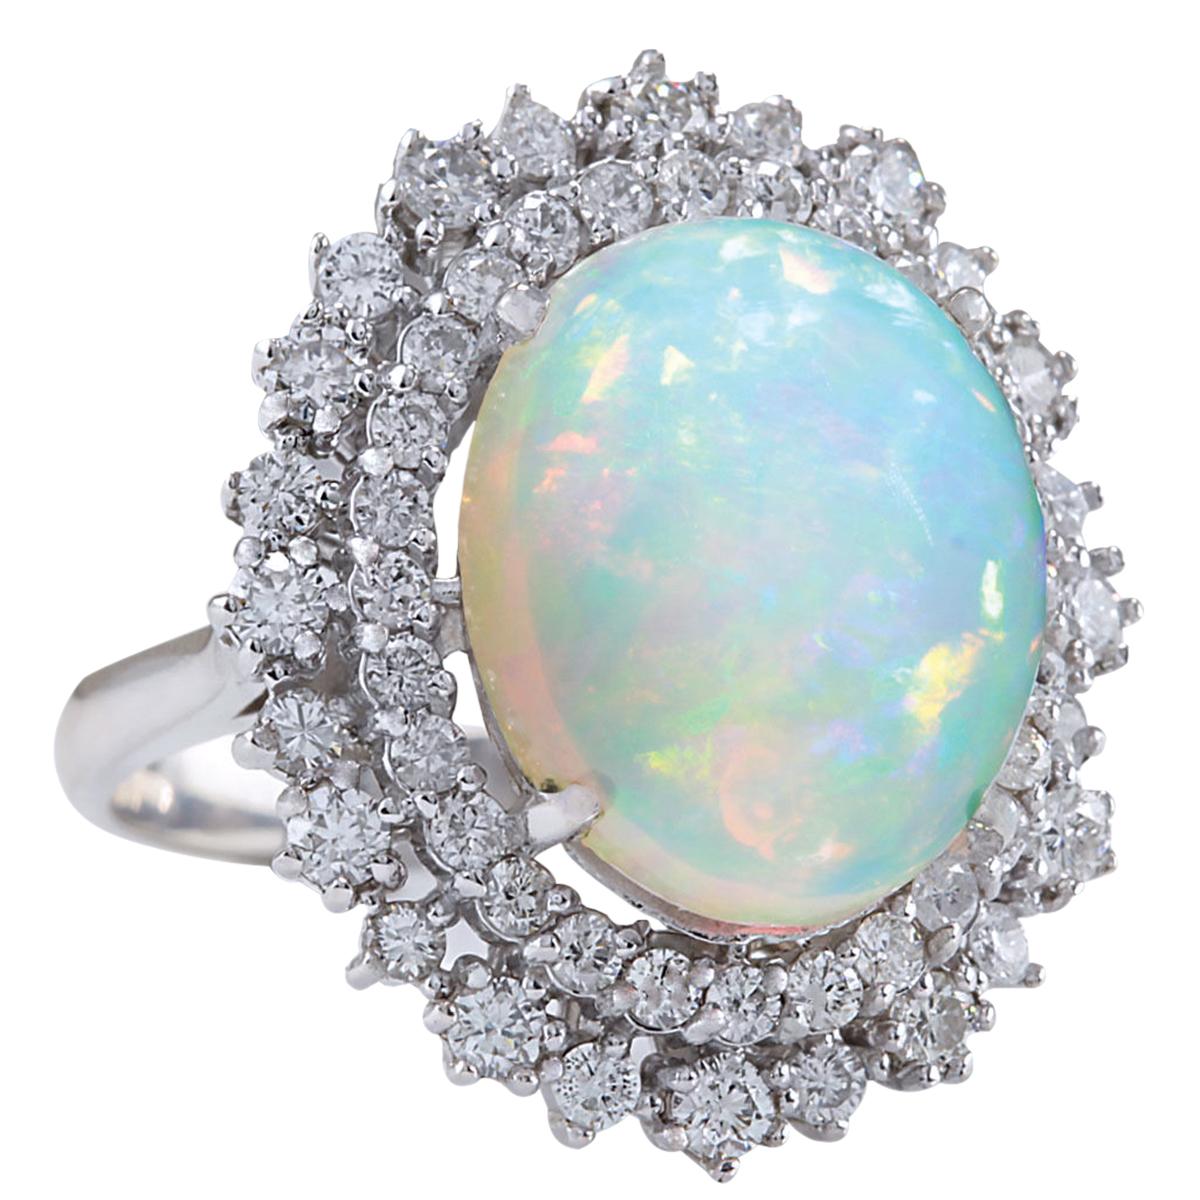 Stamped: 14K White Gold
Total Ring Weight: 8.5 Grams
Total Natural Opal Weight is 7.28 Carat (Measures: 16.00x12.00 mm)
Color: Multicolor
Total Natural Diamond Weight is 1.42 Carat
Color: F-G, Clarity: VS2-SI1
Face Measures: 24.65x21.10 mm
Sku: